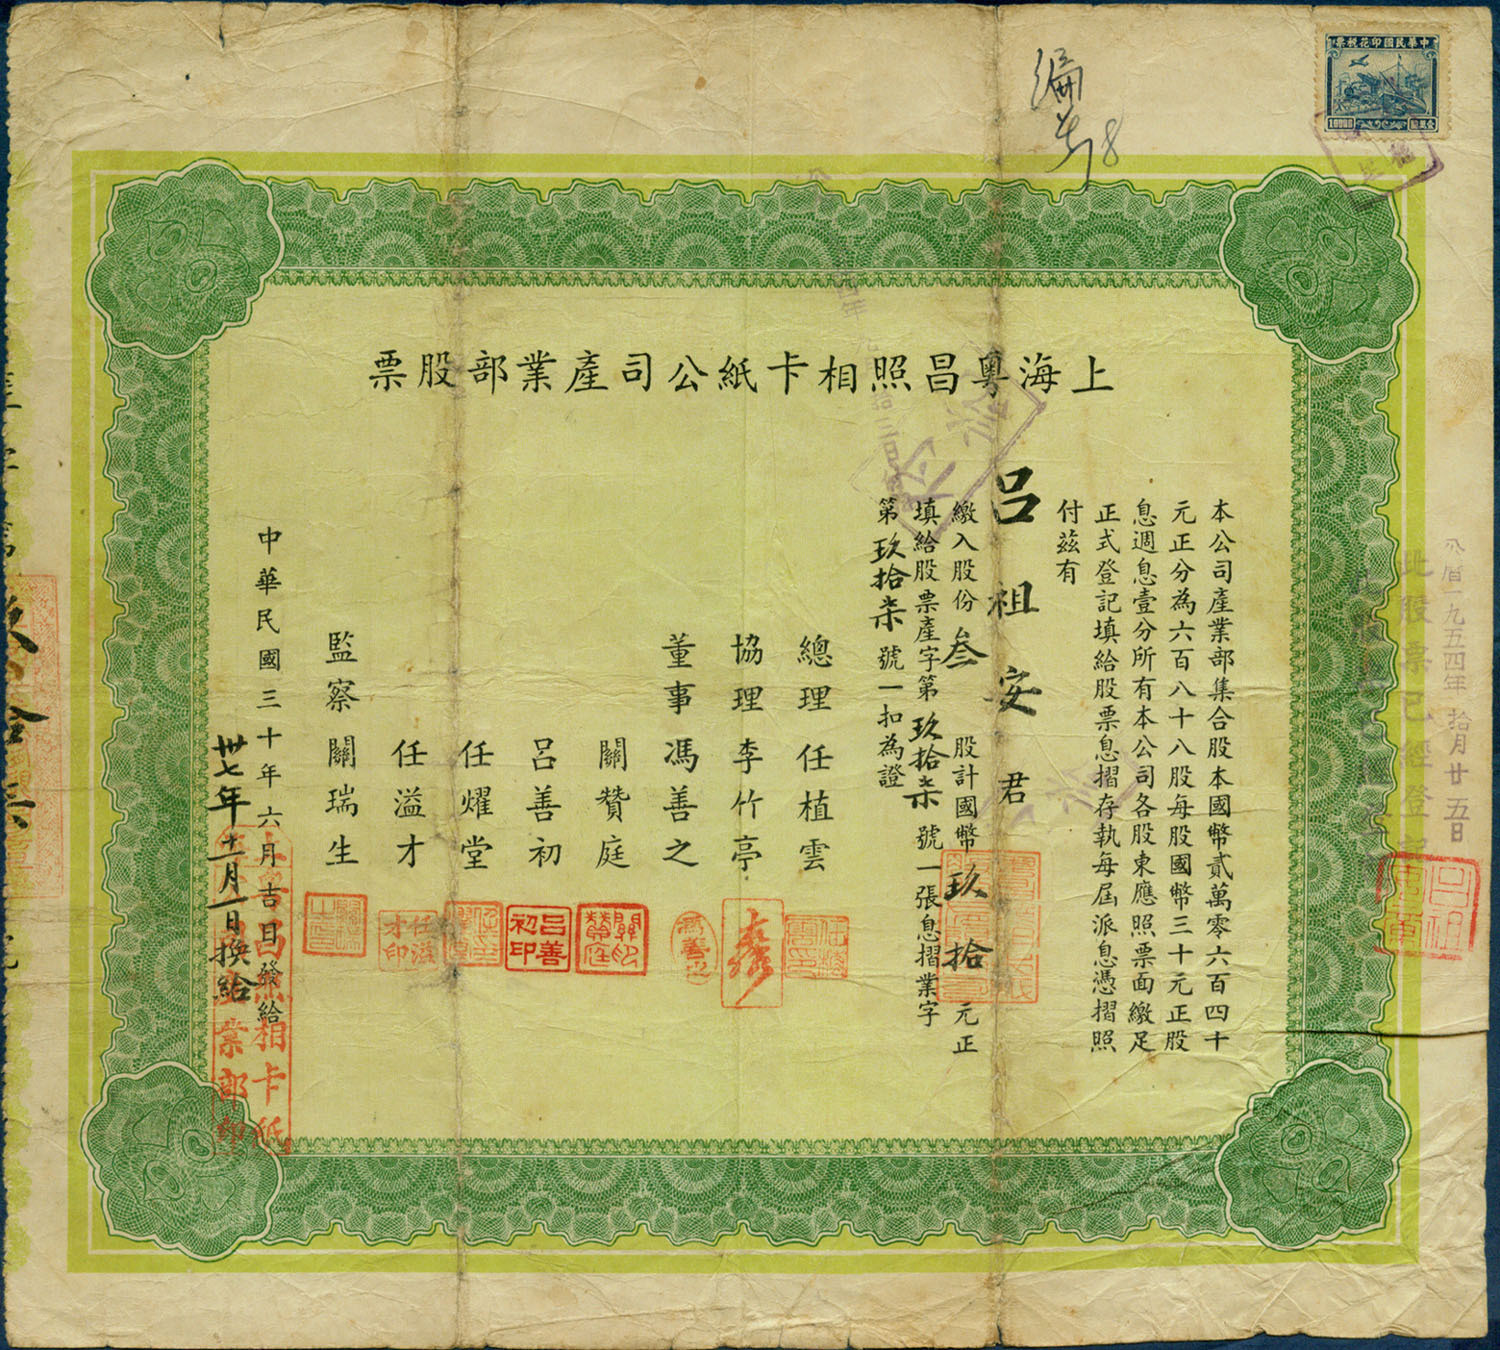 S1157 Shanghai Yue-Chang Photo-Card Co. Ltd, Share Certificate of 1941